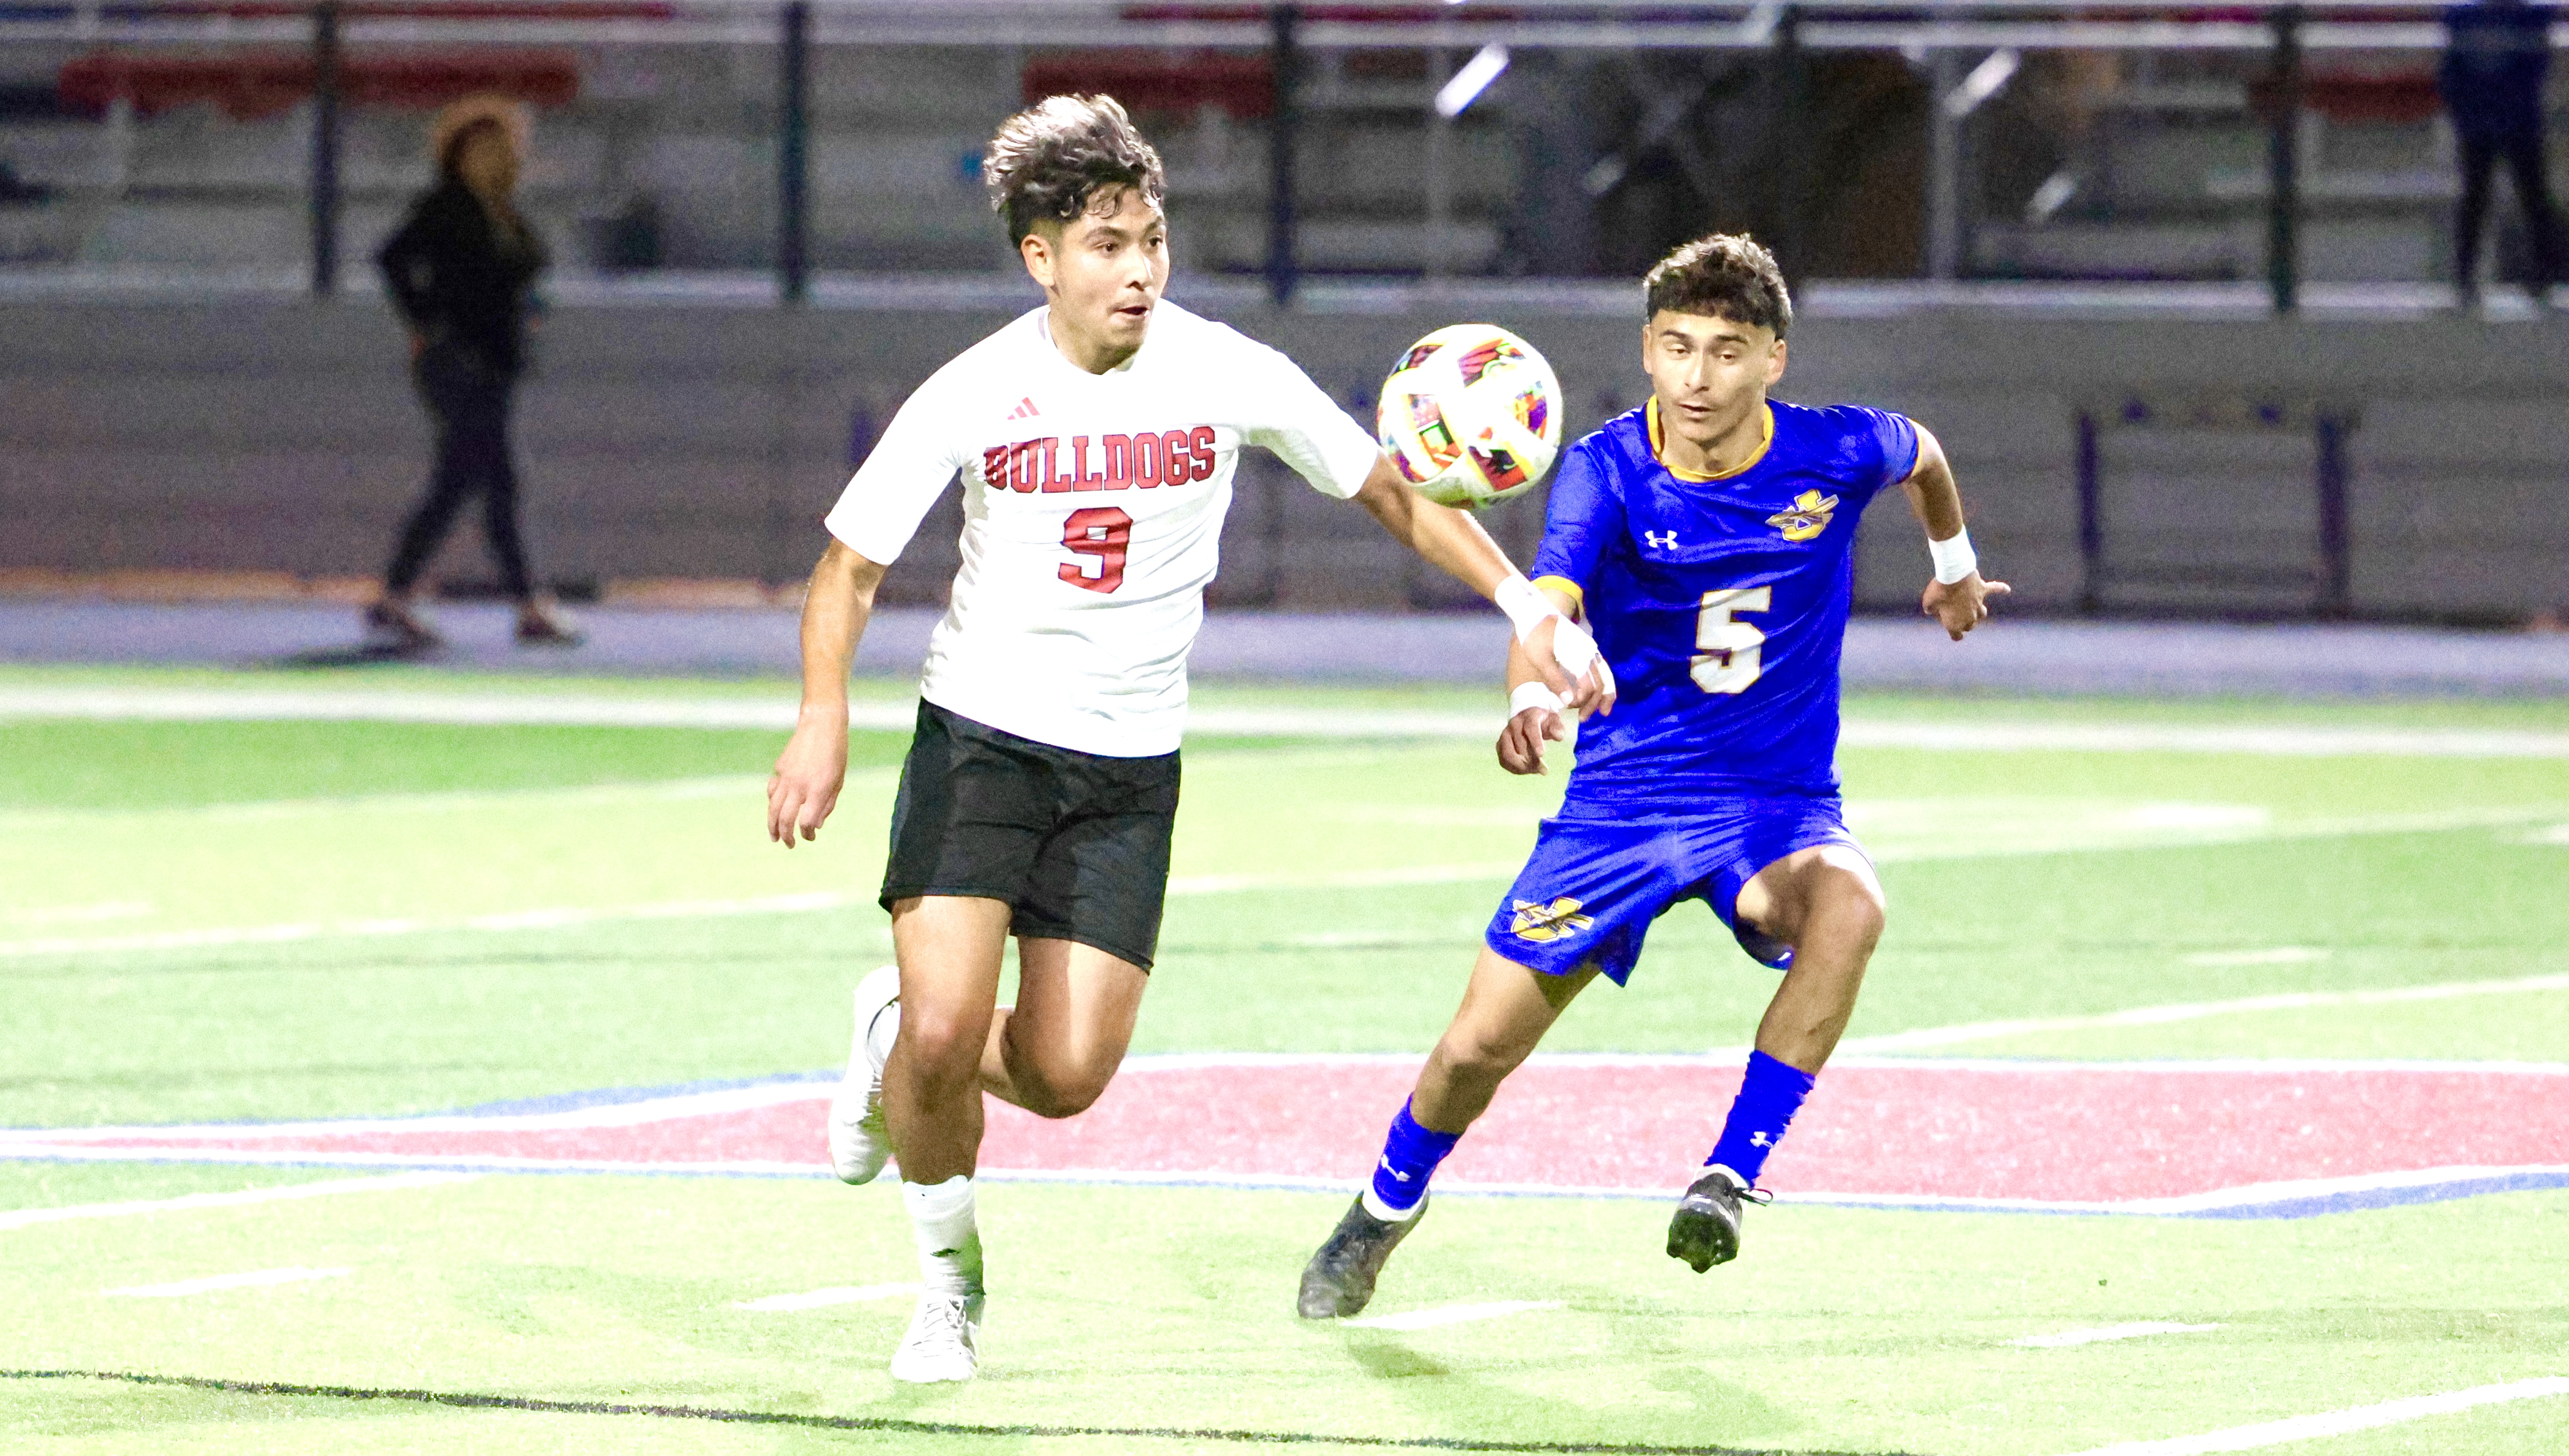 Kilgore's Diego Rojas (left) controls the ball against Jacksonville, a game the Bulldogs won on Tuesday. Kilgore (23-2-2) faces Wilmer-Hutchins (19-3) in the UIL Class 4A Region II Tournament at 11 a.m. Friday at CHRISTUS Trinity Mother Frances Rose Stadium in Tyler. The season is over for the losing team; the winners advance to Saturday's regional final to face either Palestine or Panther Creek. (Photo by DENNIS JACOBS - ETBLITZ.COM)